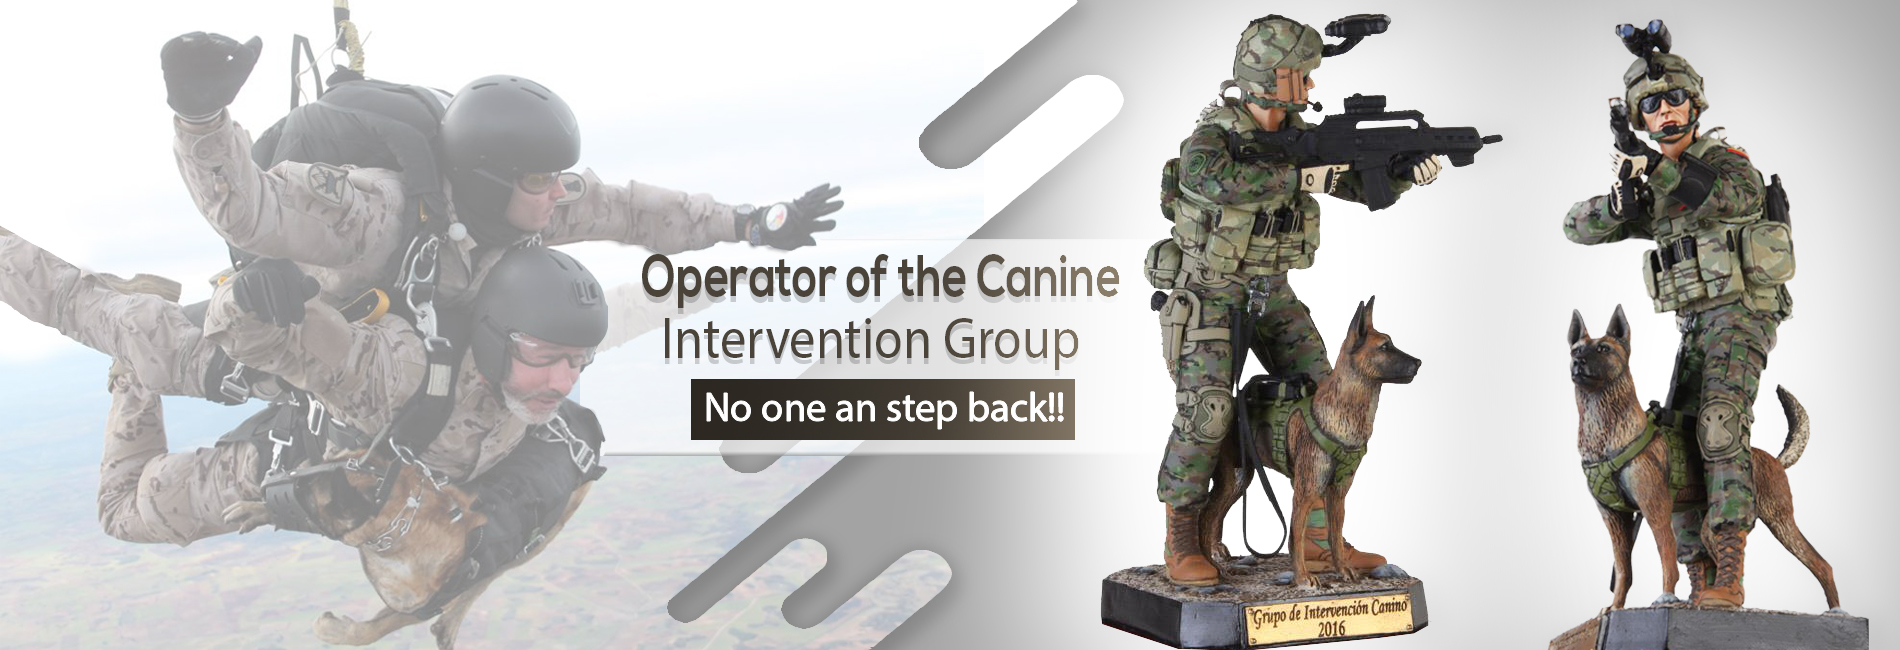 Canine Intervention Group